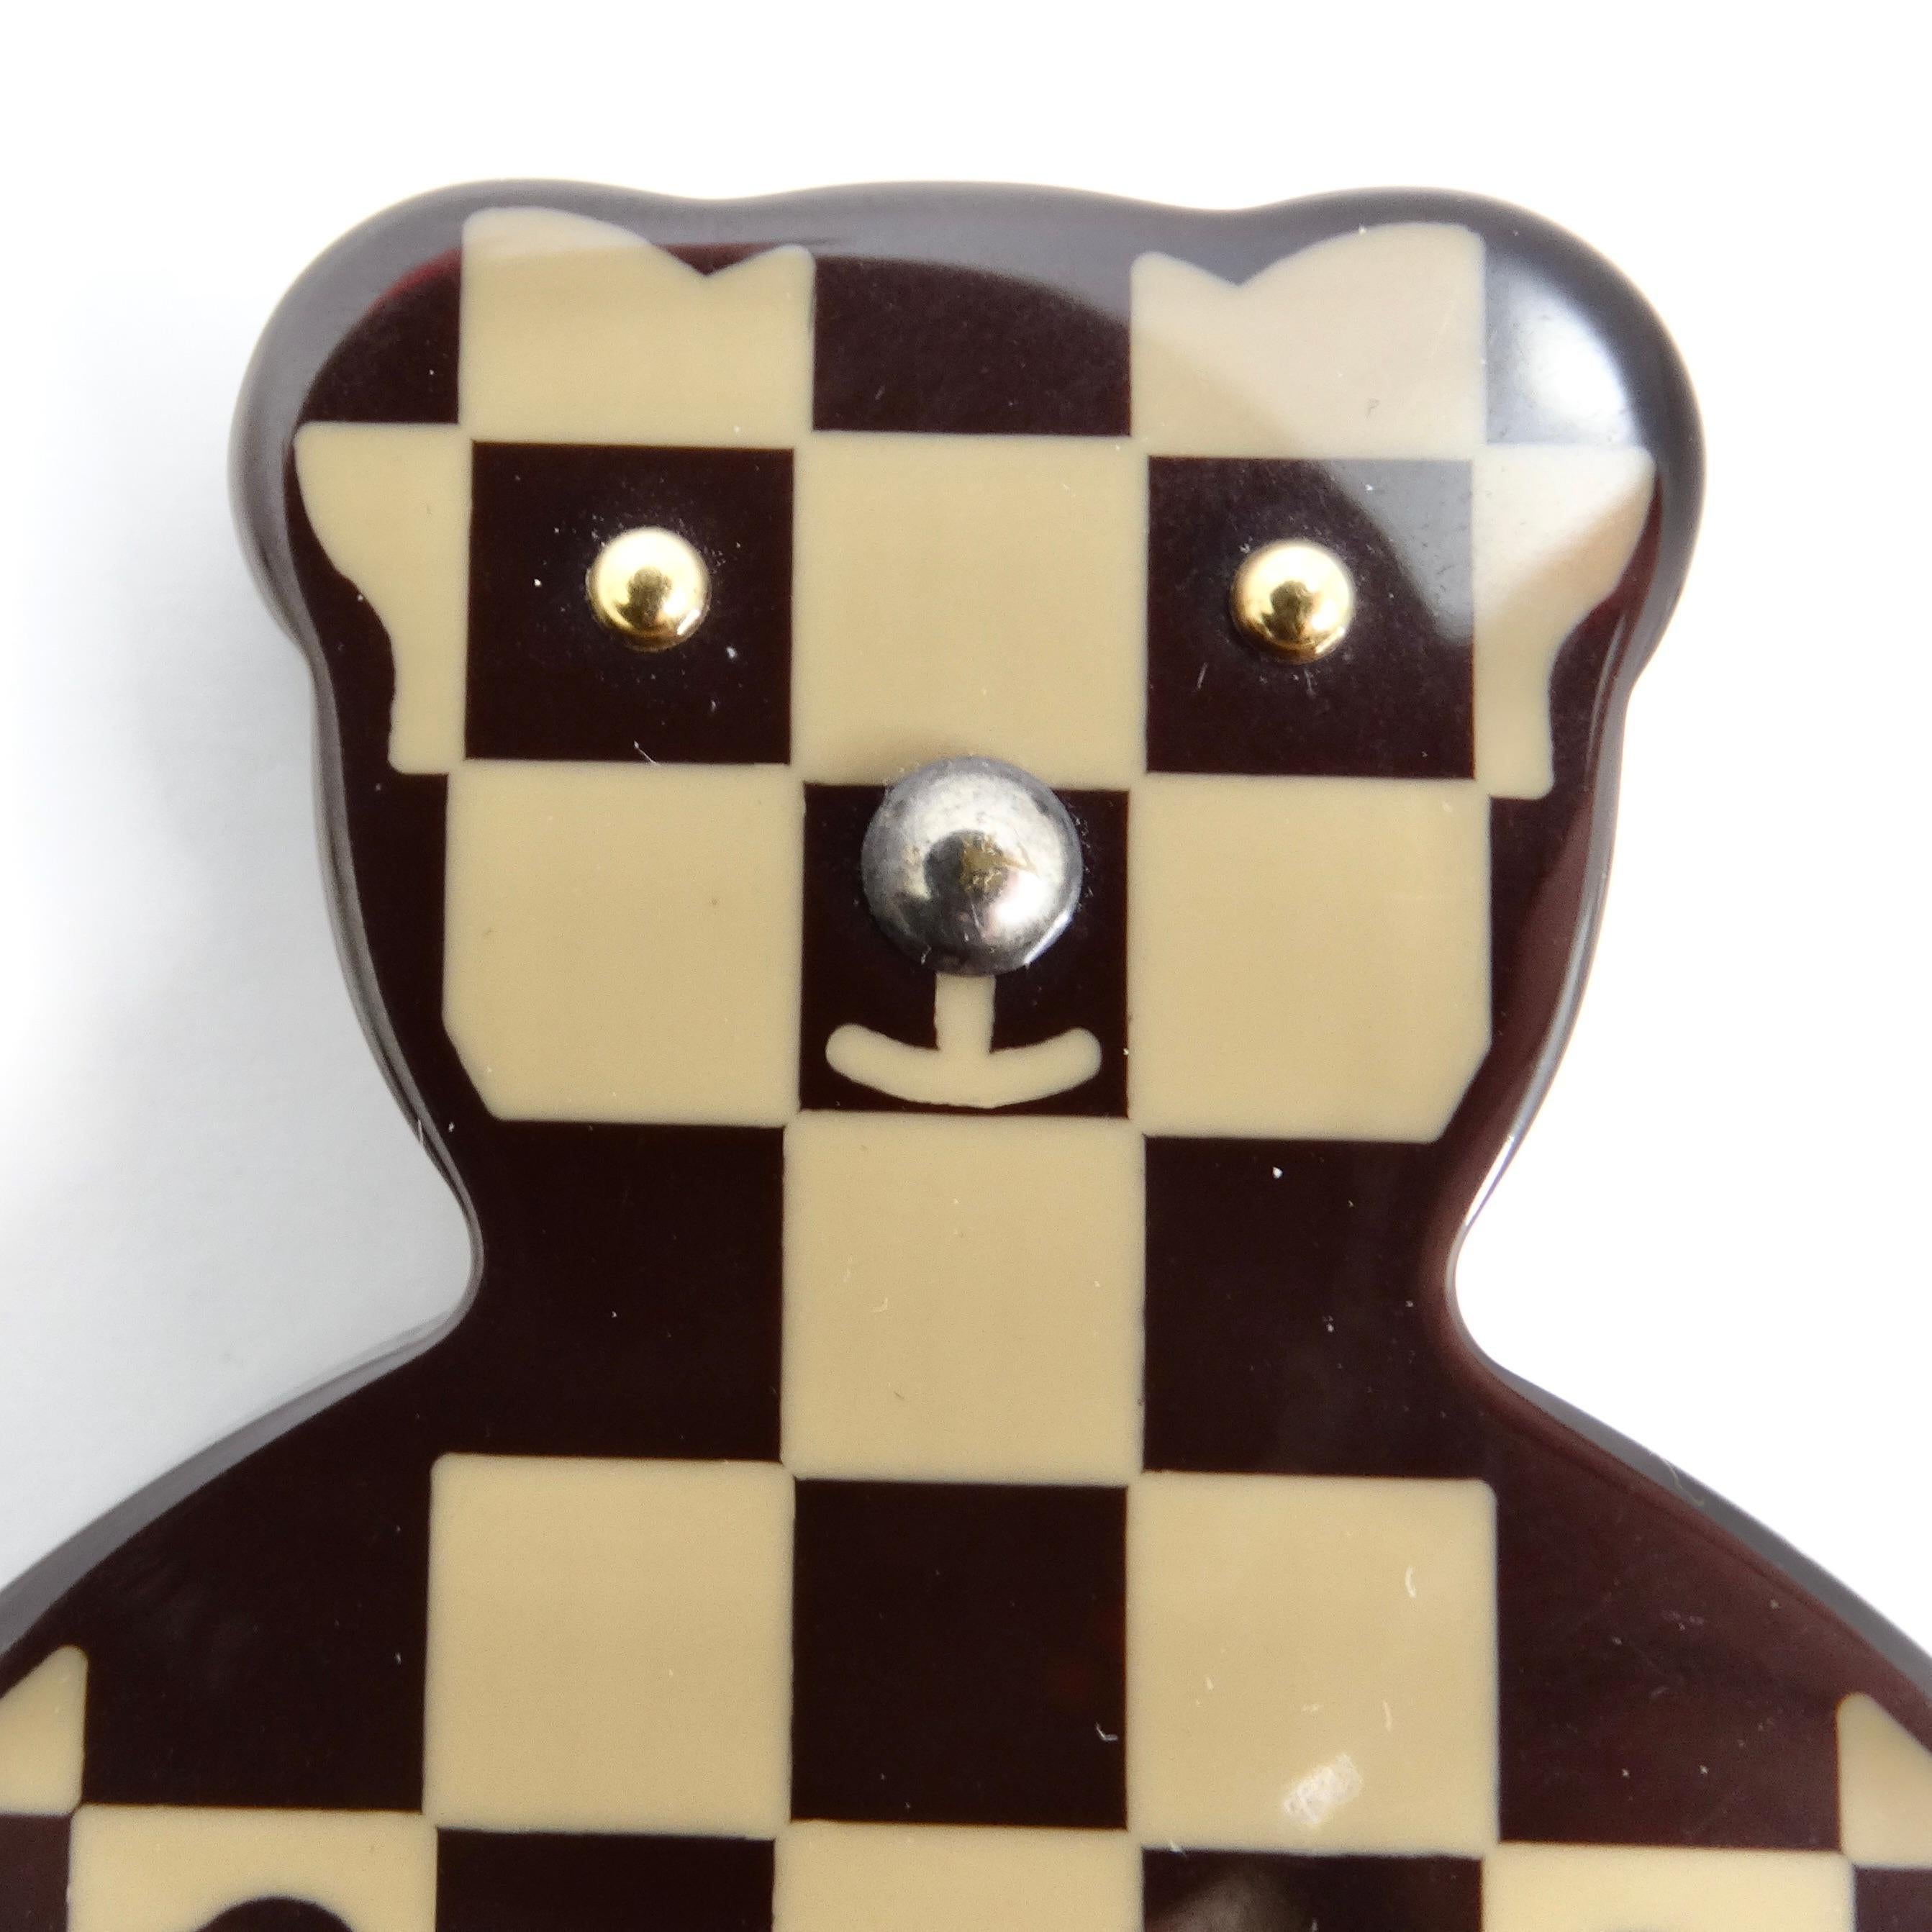 Louis Vuitton Damier Ebene Resin Teddy Bear Brooch In Excellent Condition For Sale In Scottsdale, AZ